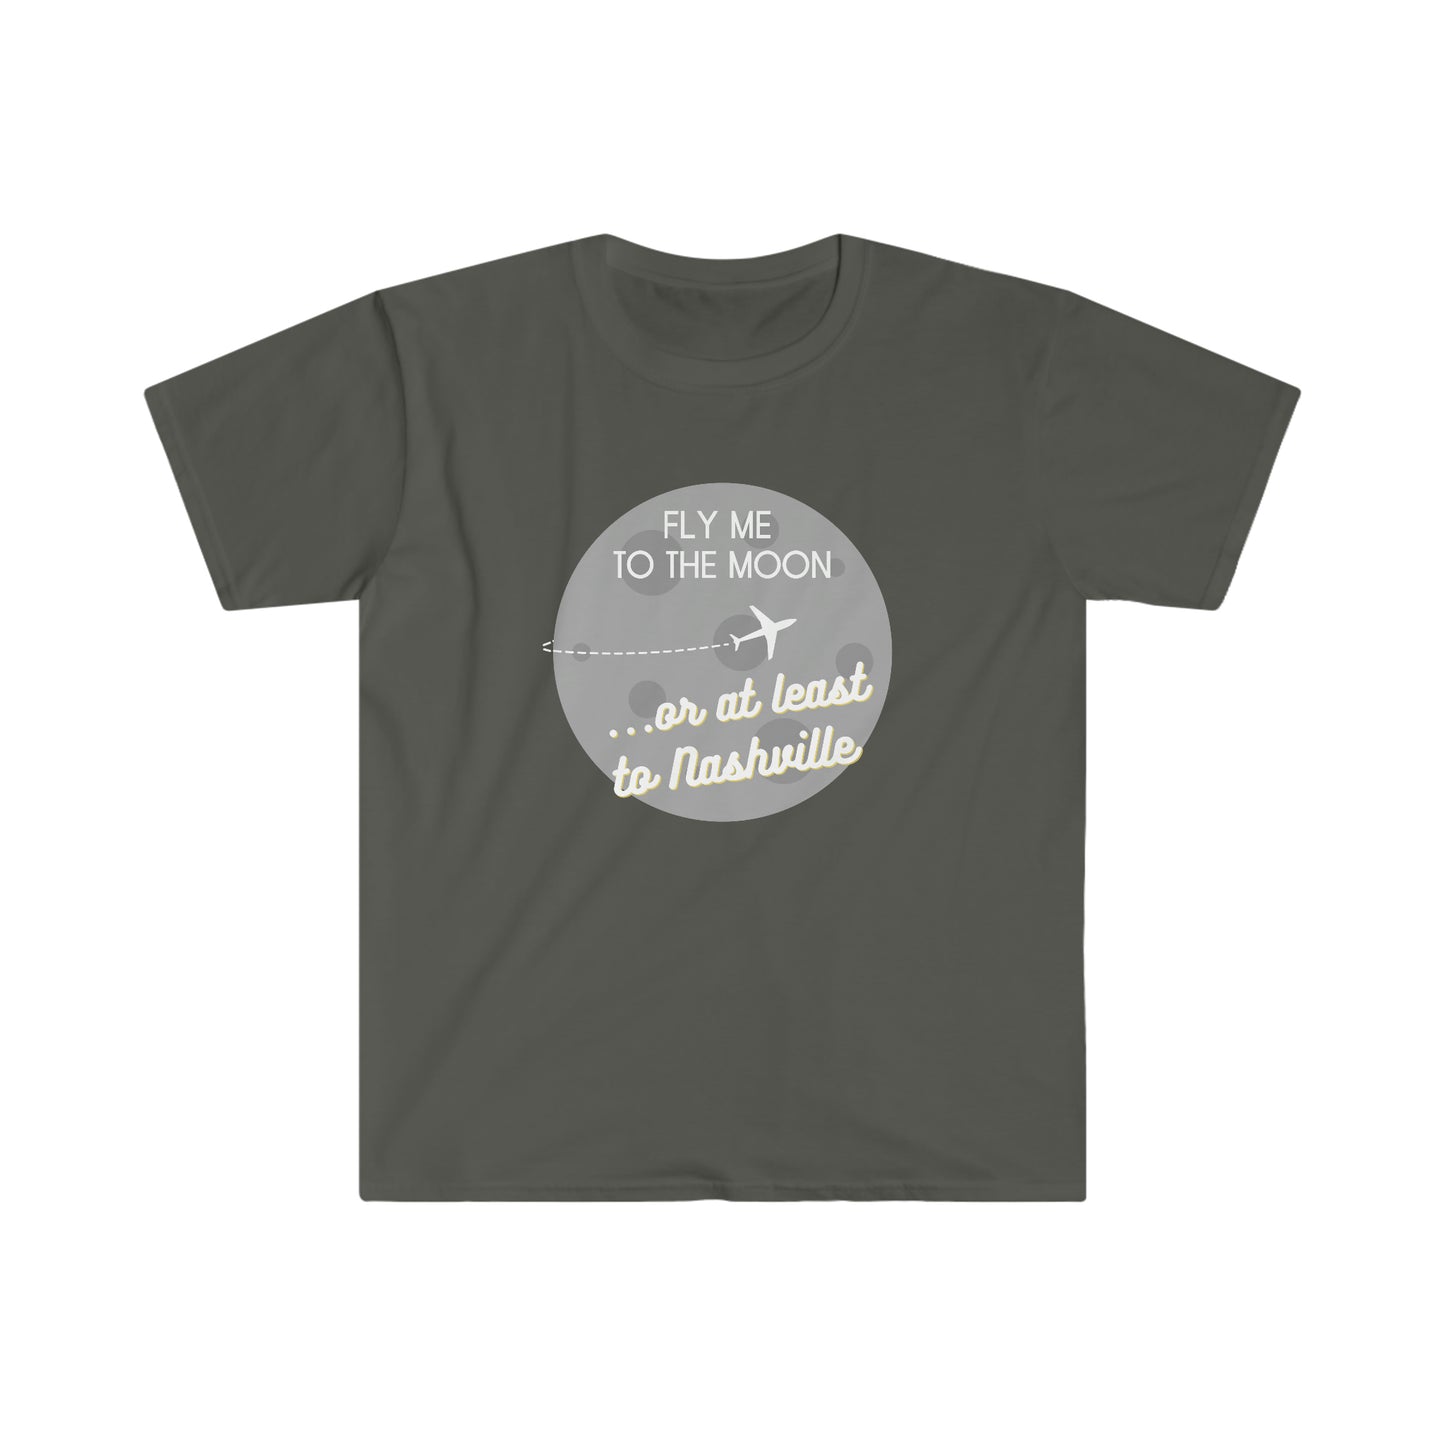 Fly Me to the Moon or at Least to Nashville, TN Travel T-shirt